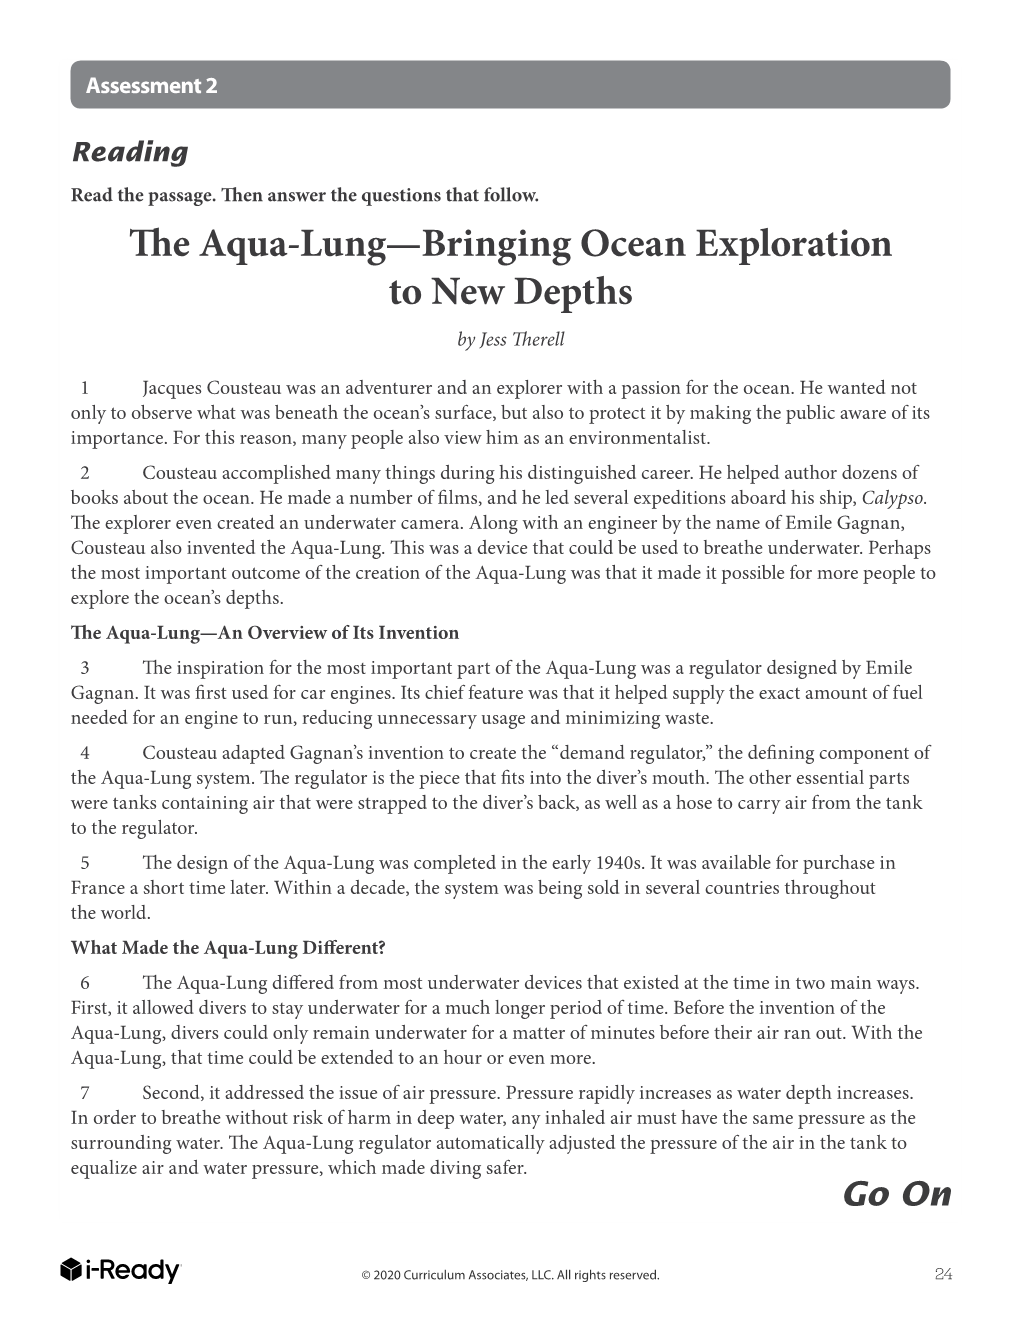 The Aqua-Lung—Bringing Ocean Exploration to New Depths by Jess Therell